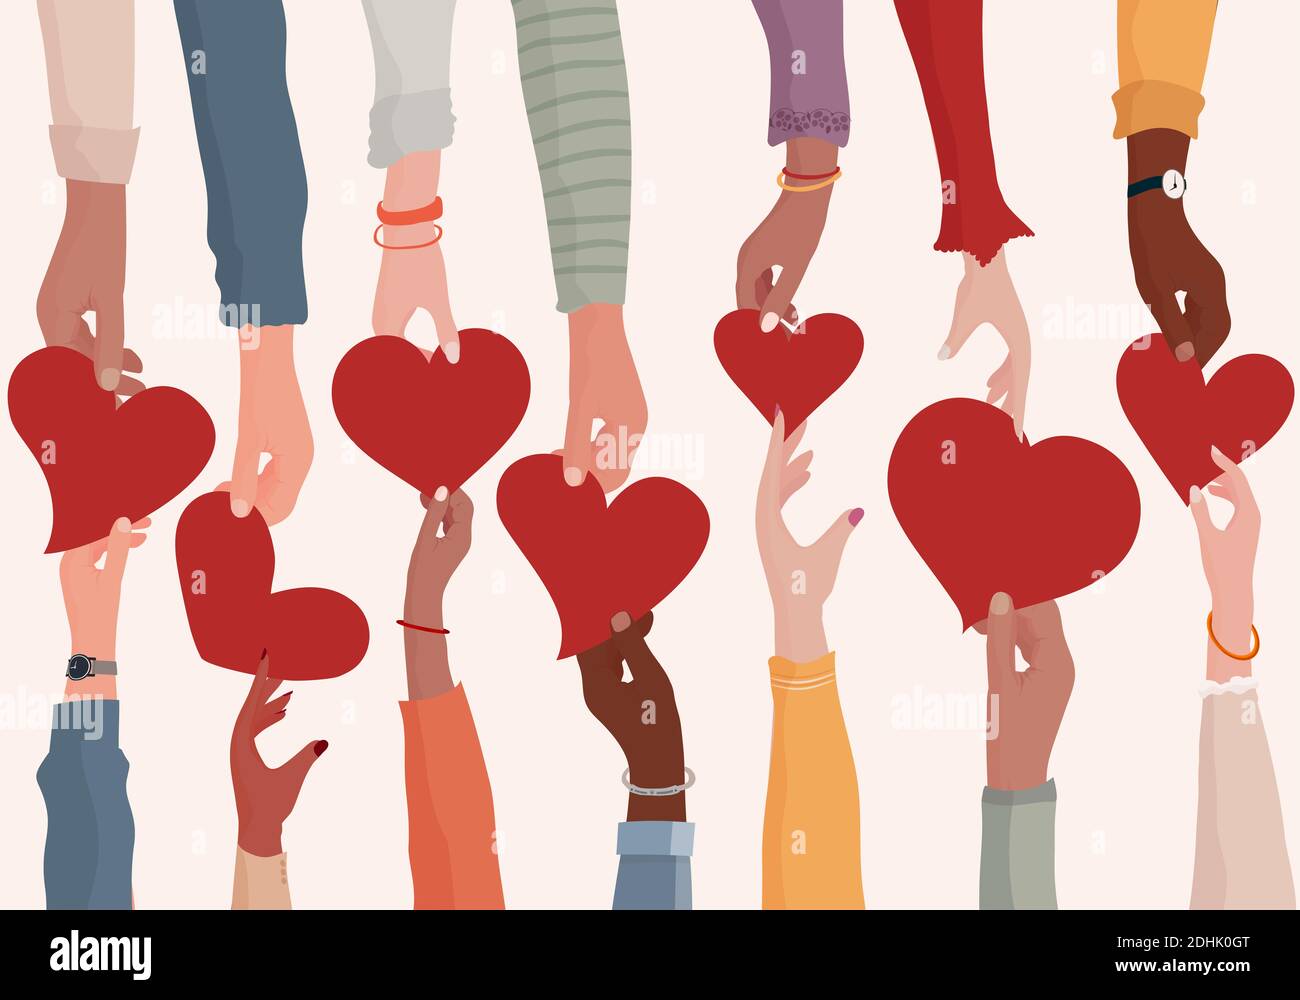 Concept charity donation and help or social assistance.Voluntary hands that donate a heart to other hands as a metaphor for charity and contribution Stock Photo